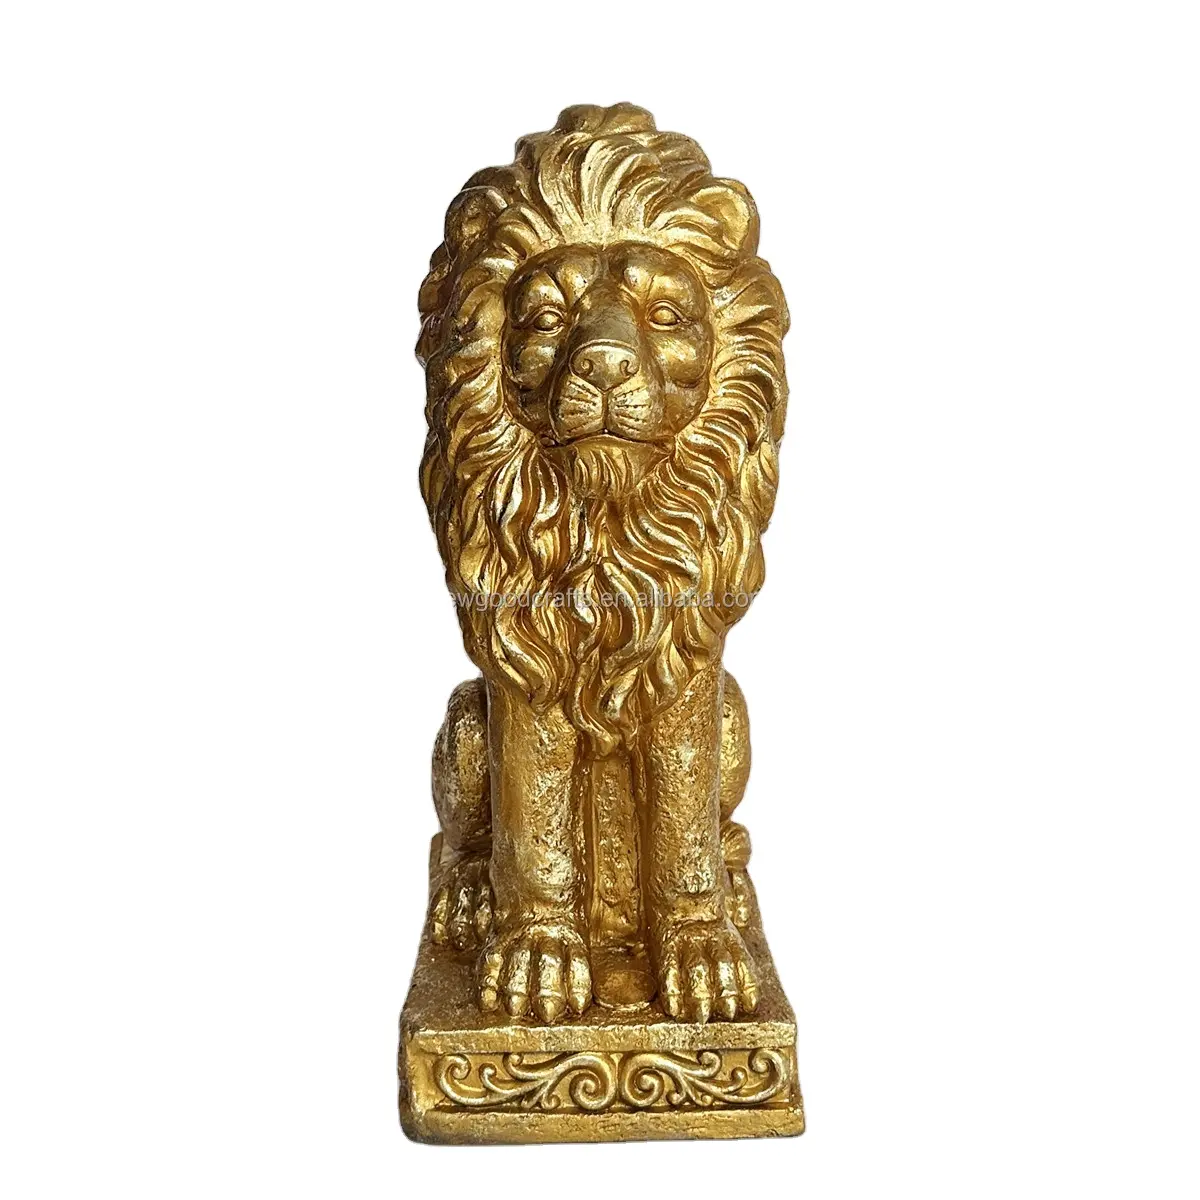 Polystone Guardian Standing Lion Outdoor Statue Gold resin statue for Garden & Home Decoration Ornament